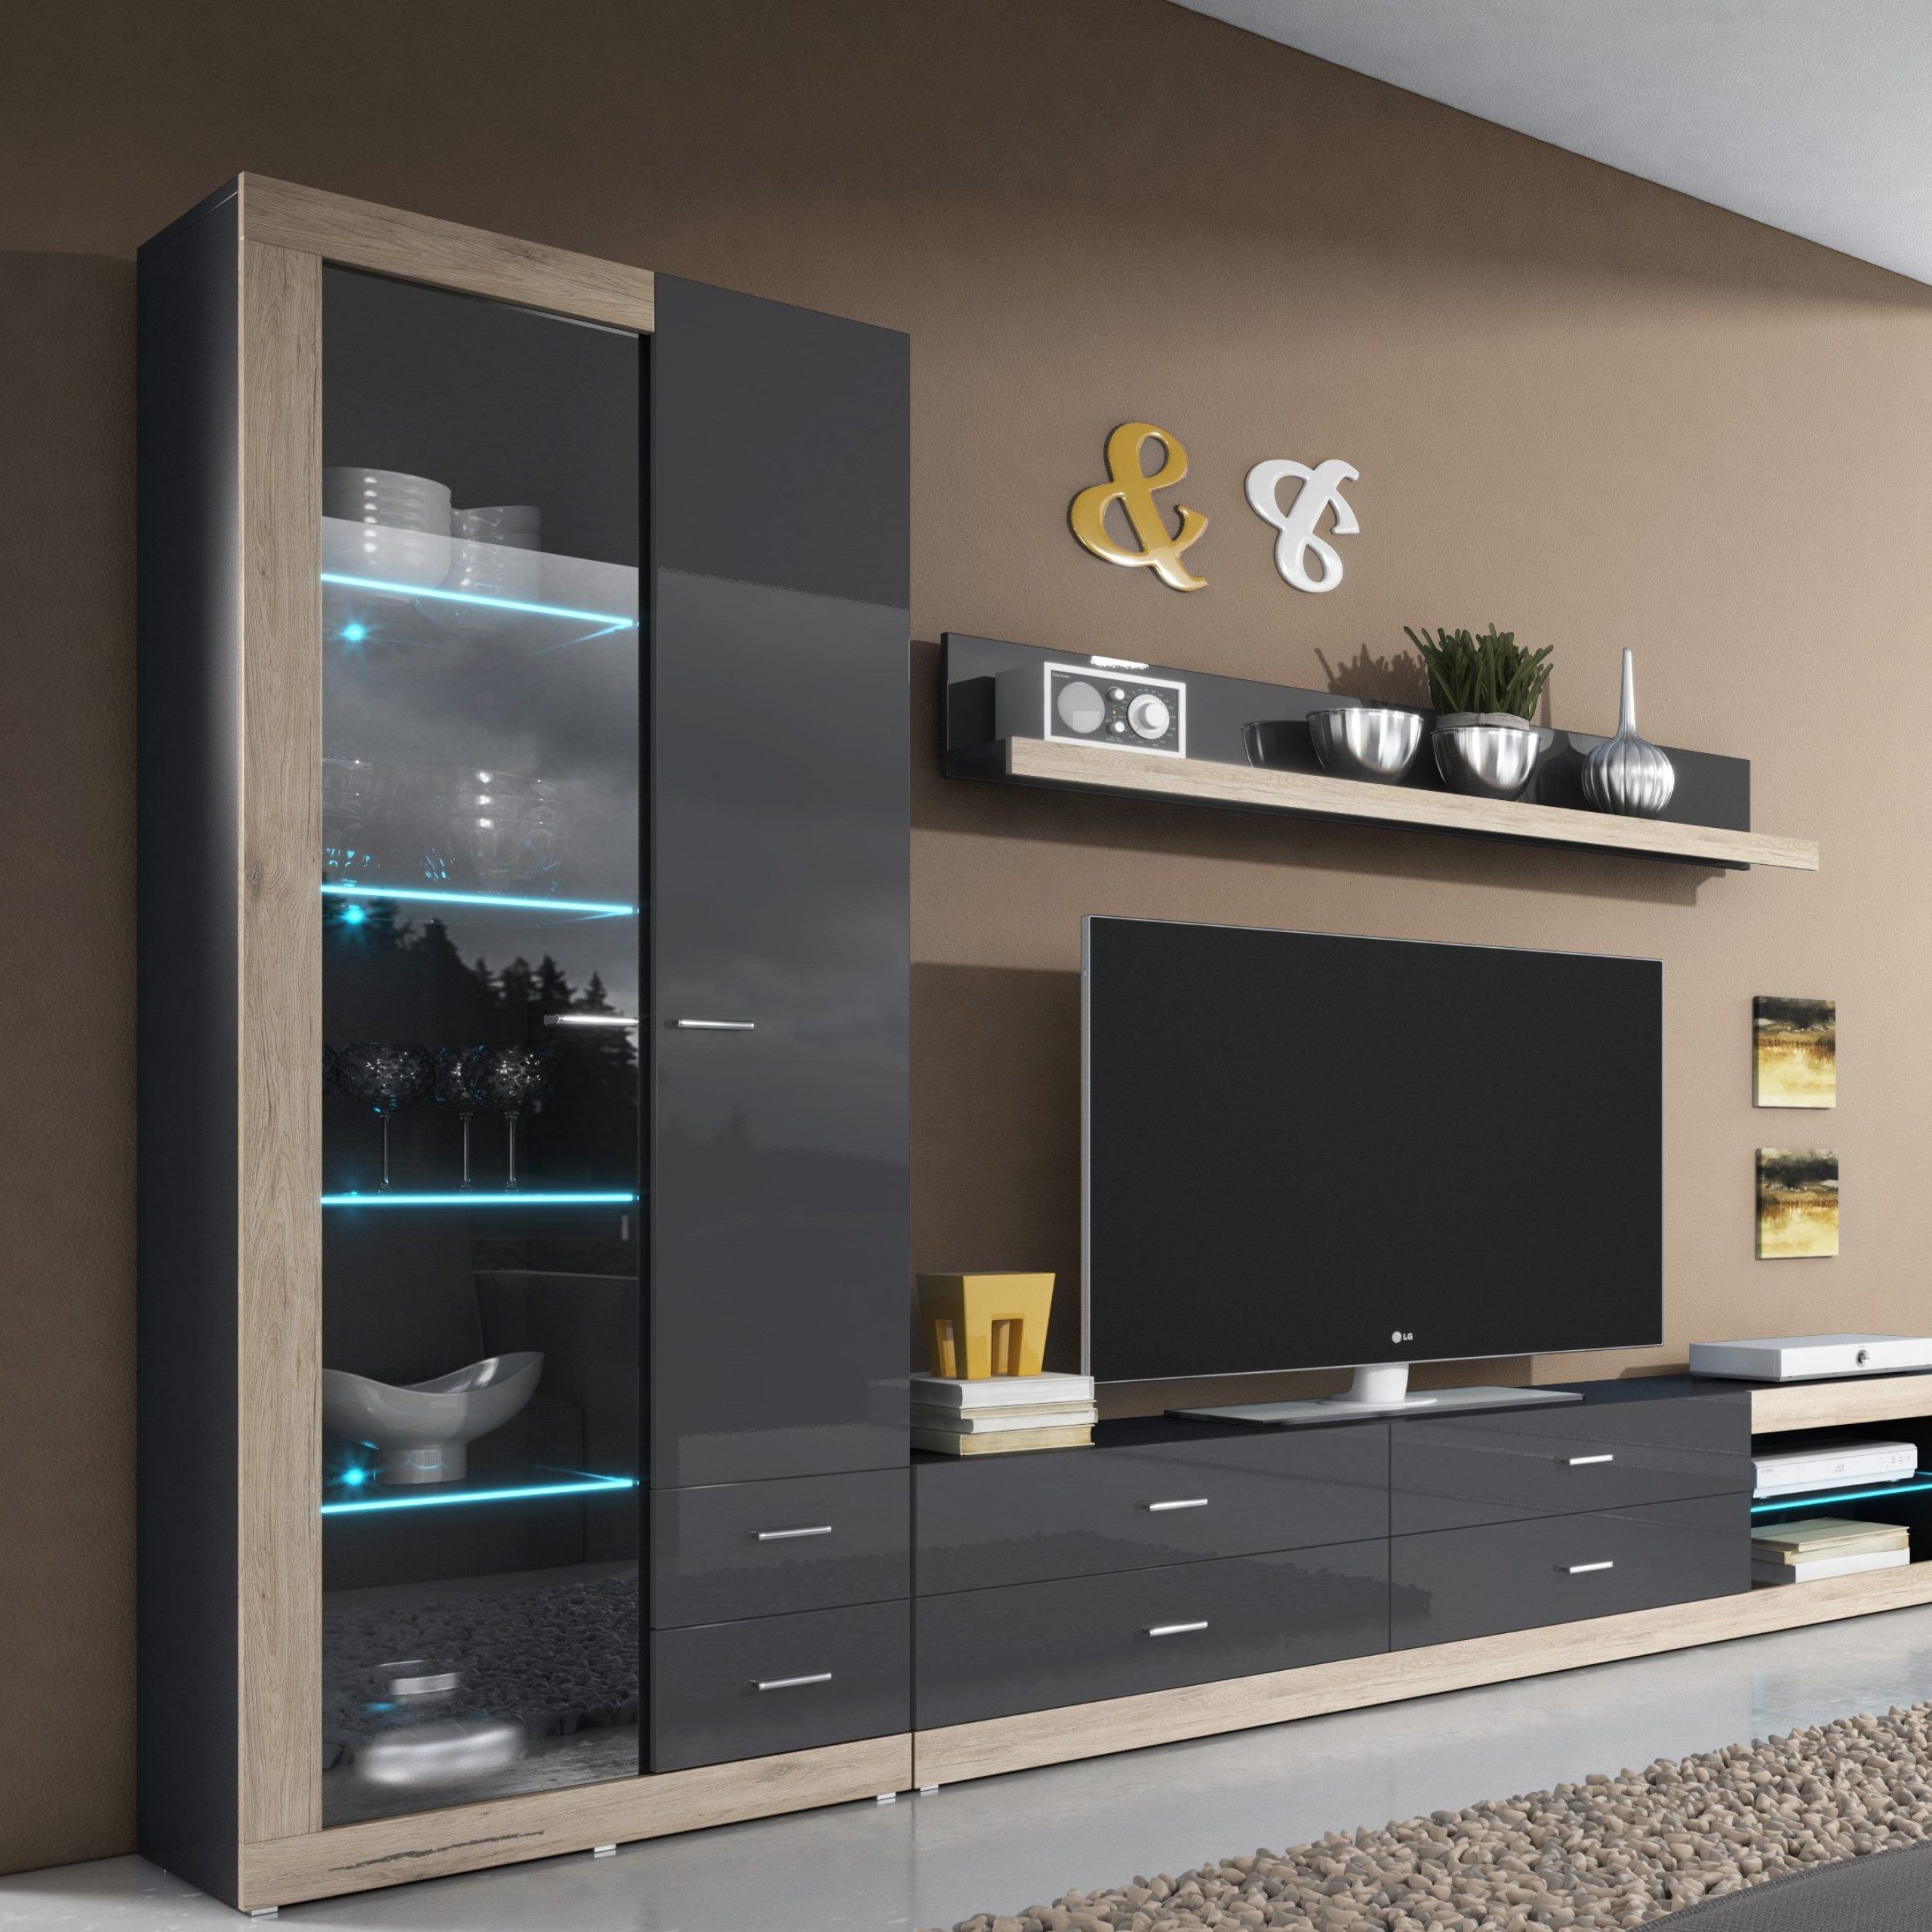 New York, Ny In 2020 | Modern Tv Wall Units, Wall Cabinets Regarding Living Room Tv Cabinets (View 5 of 15)